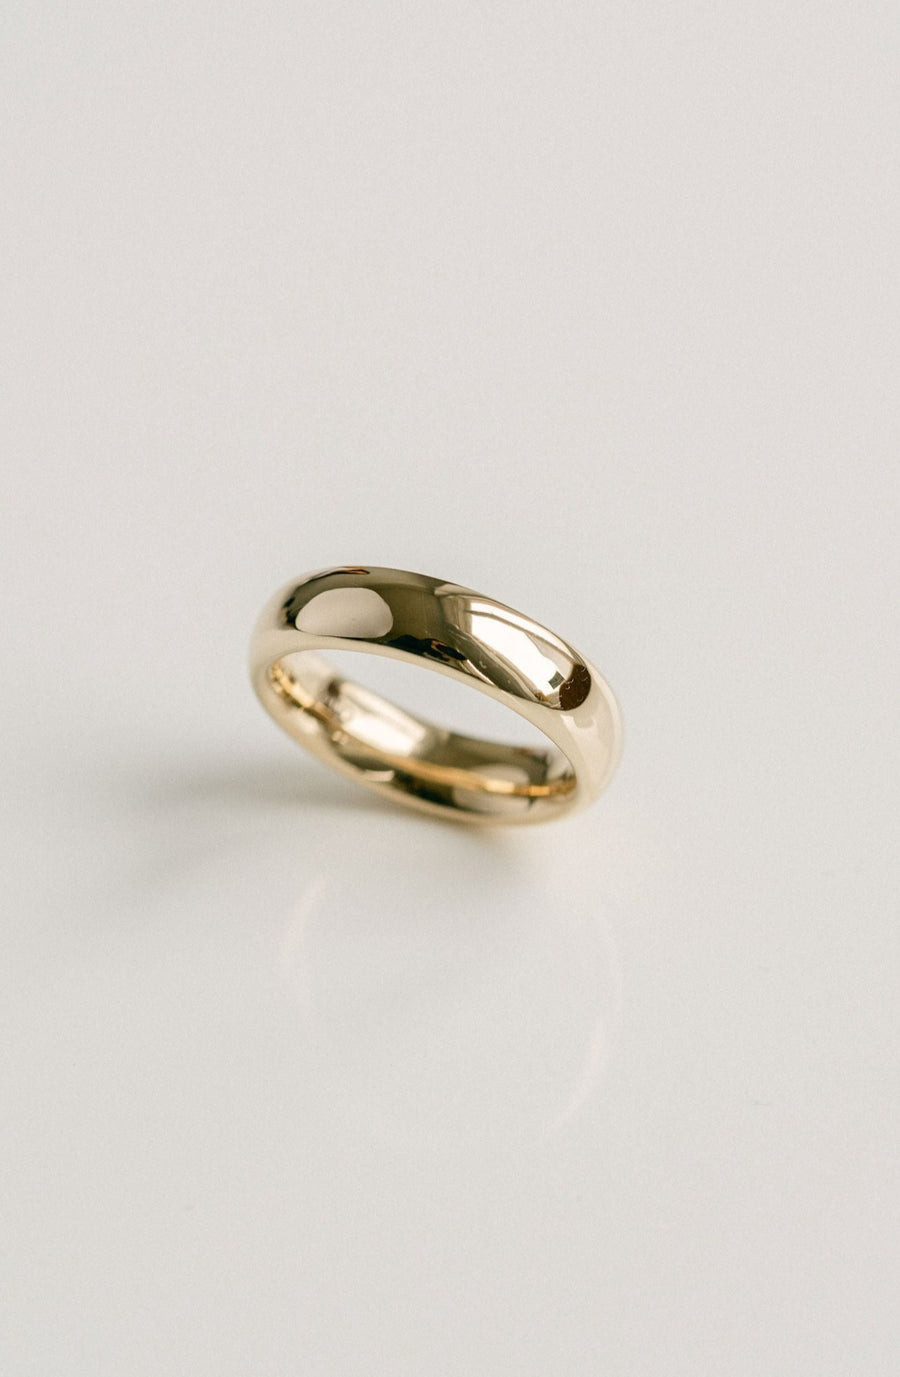 Rounded Heavy Mens Band, 14k Yellow Gold